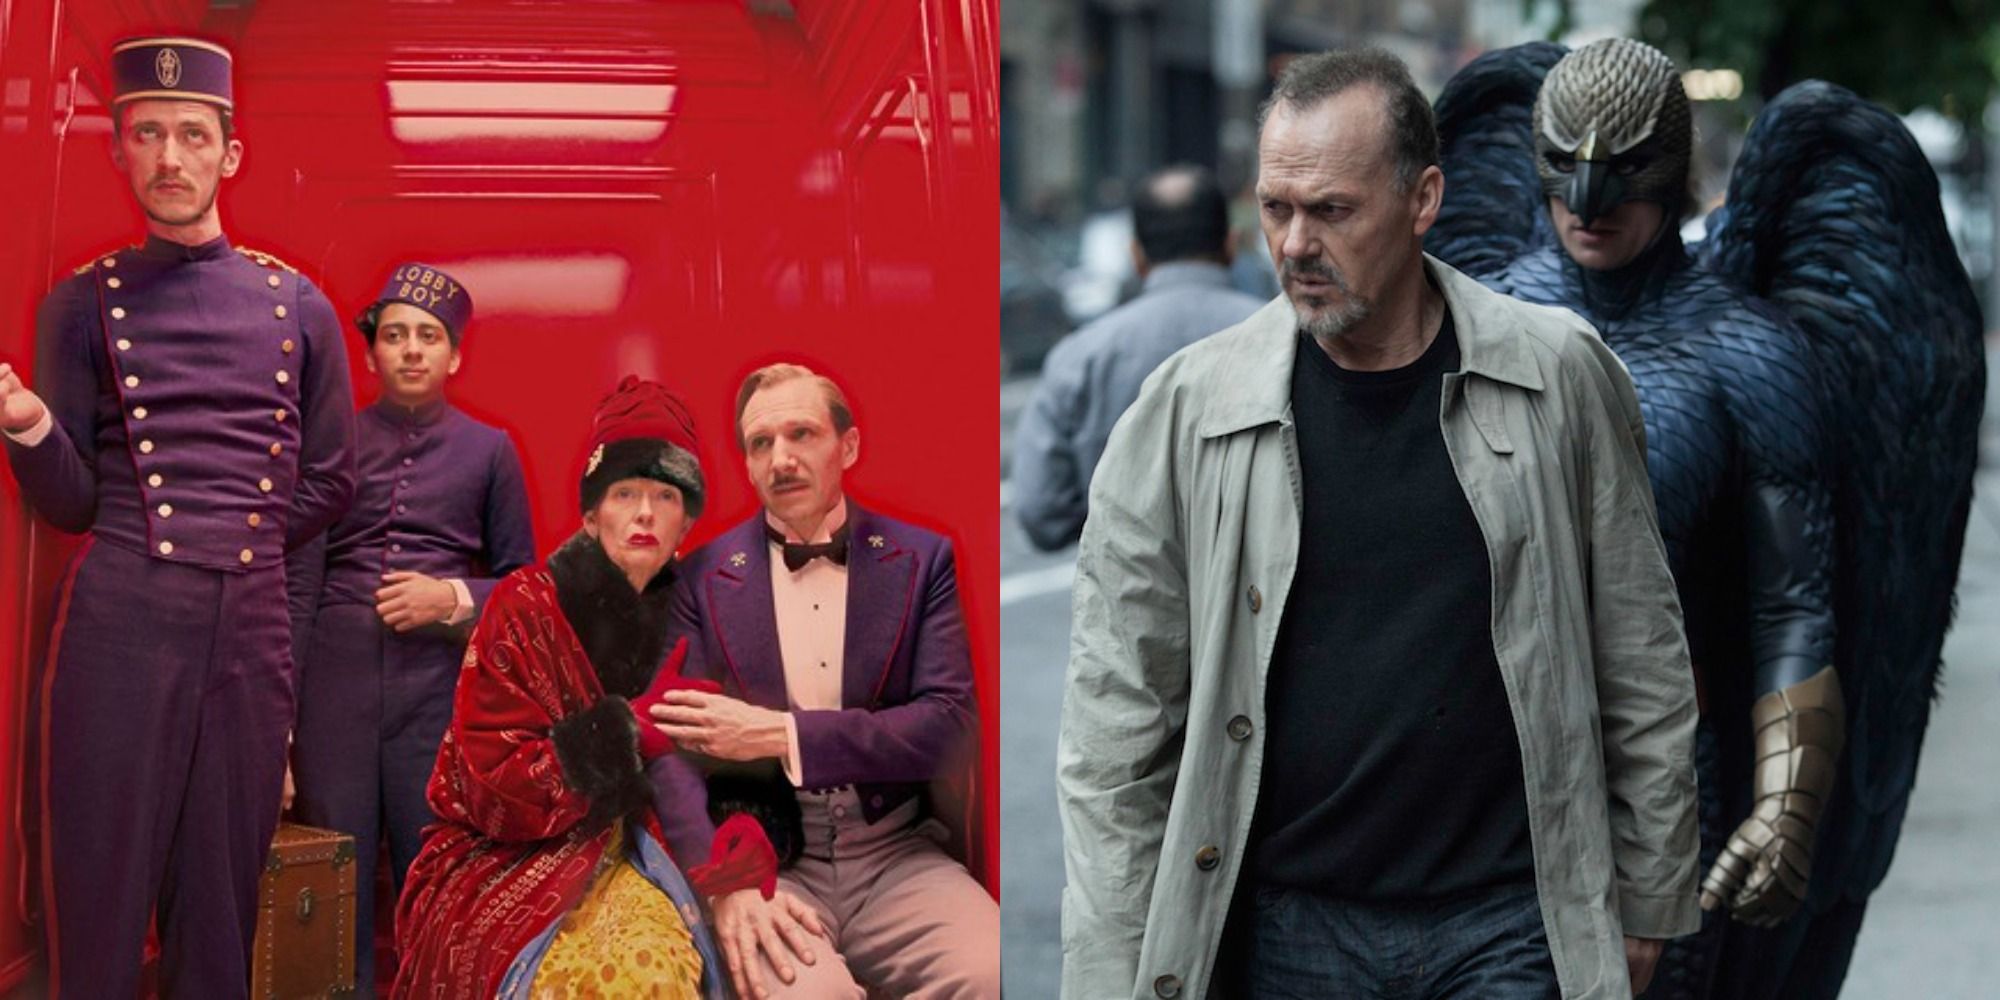 Split image showing scenes from The Grand Budapest Hotel and Birdman